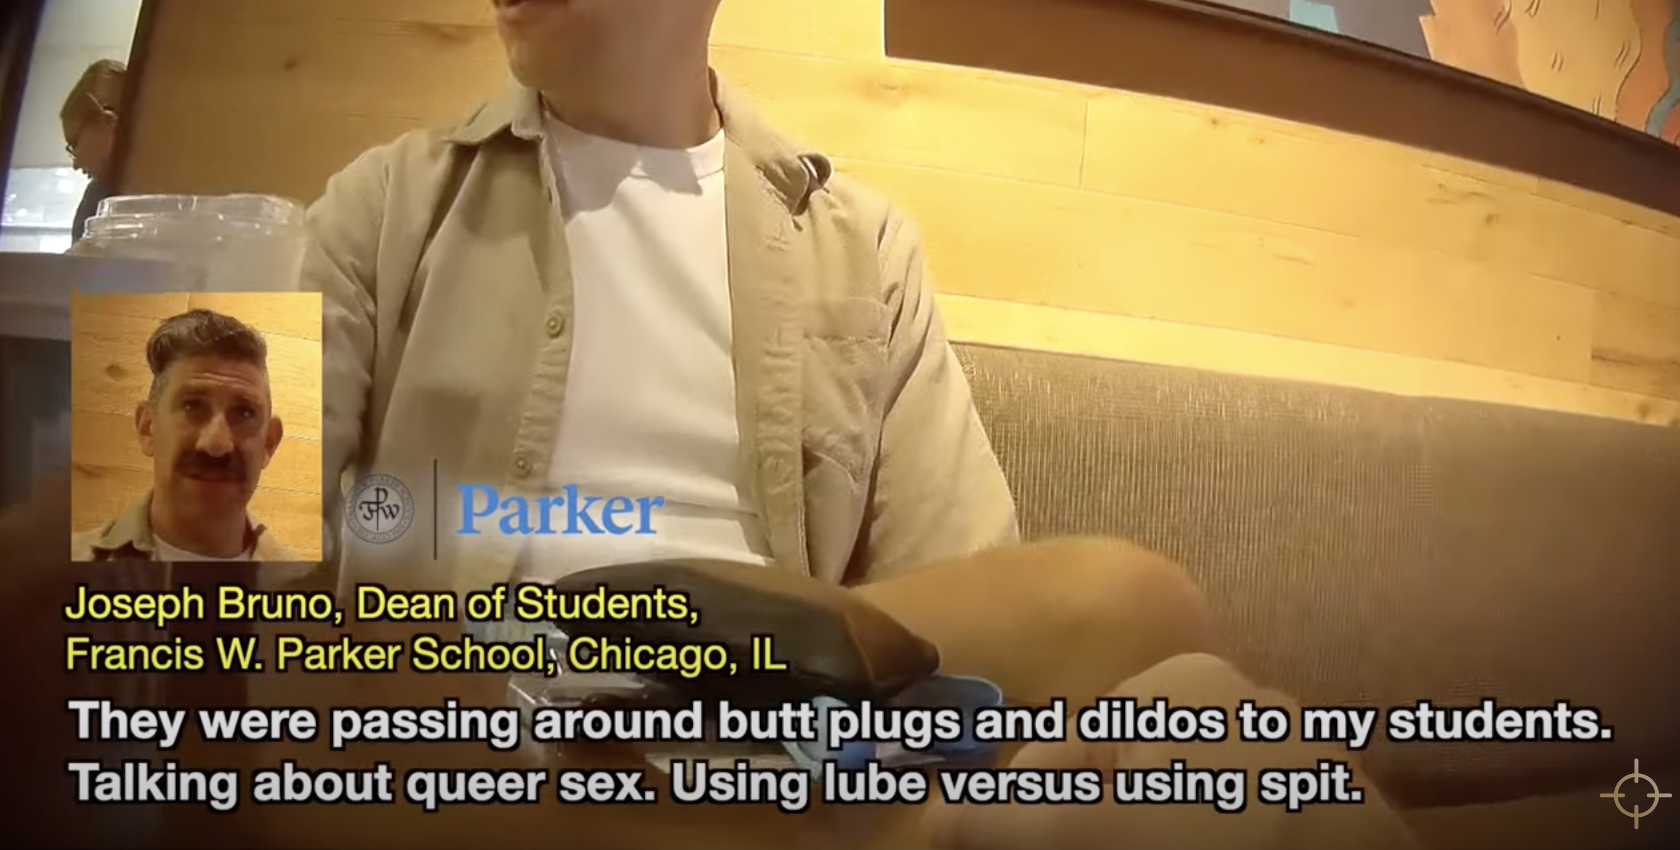 Elite Chicago Private School’s Dean Of Students Brags About Bringing In LGBTQ+ Health Center To Teach ‘Queer Sex’ To Minors.